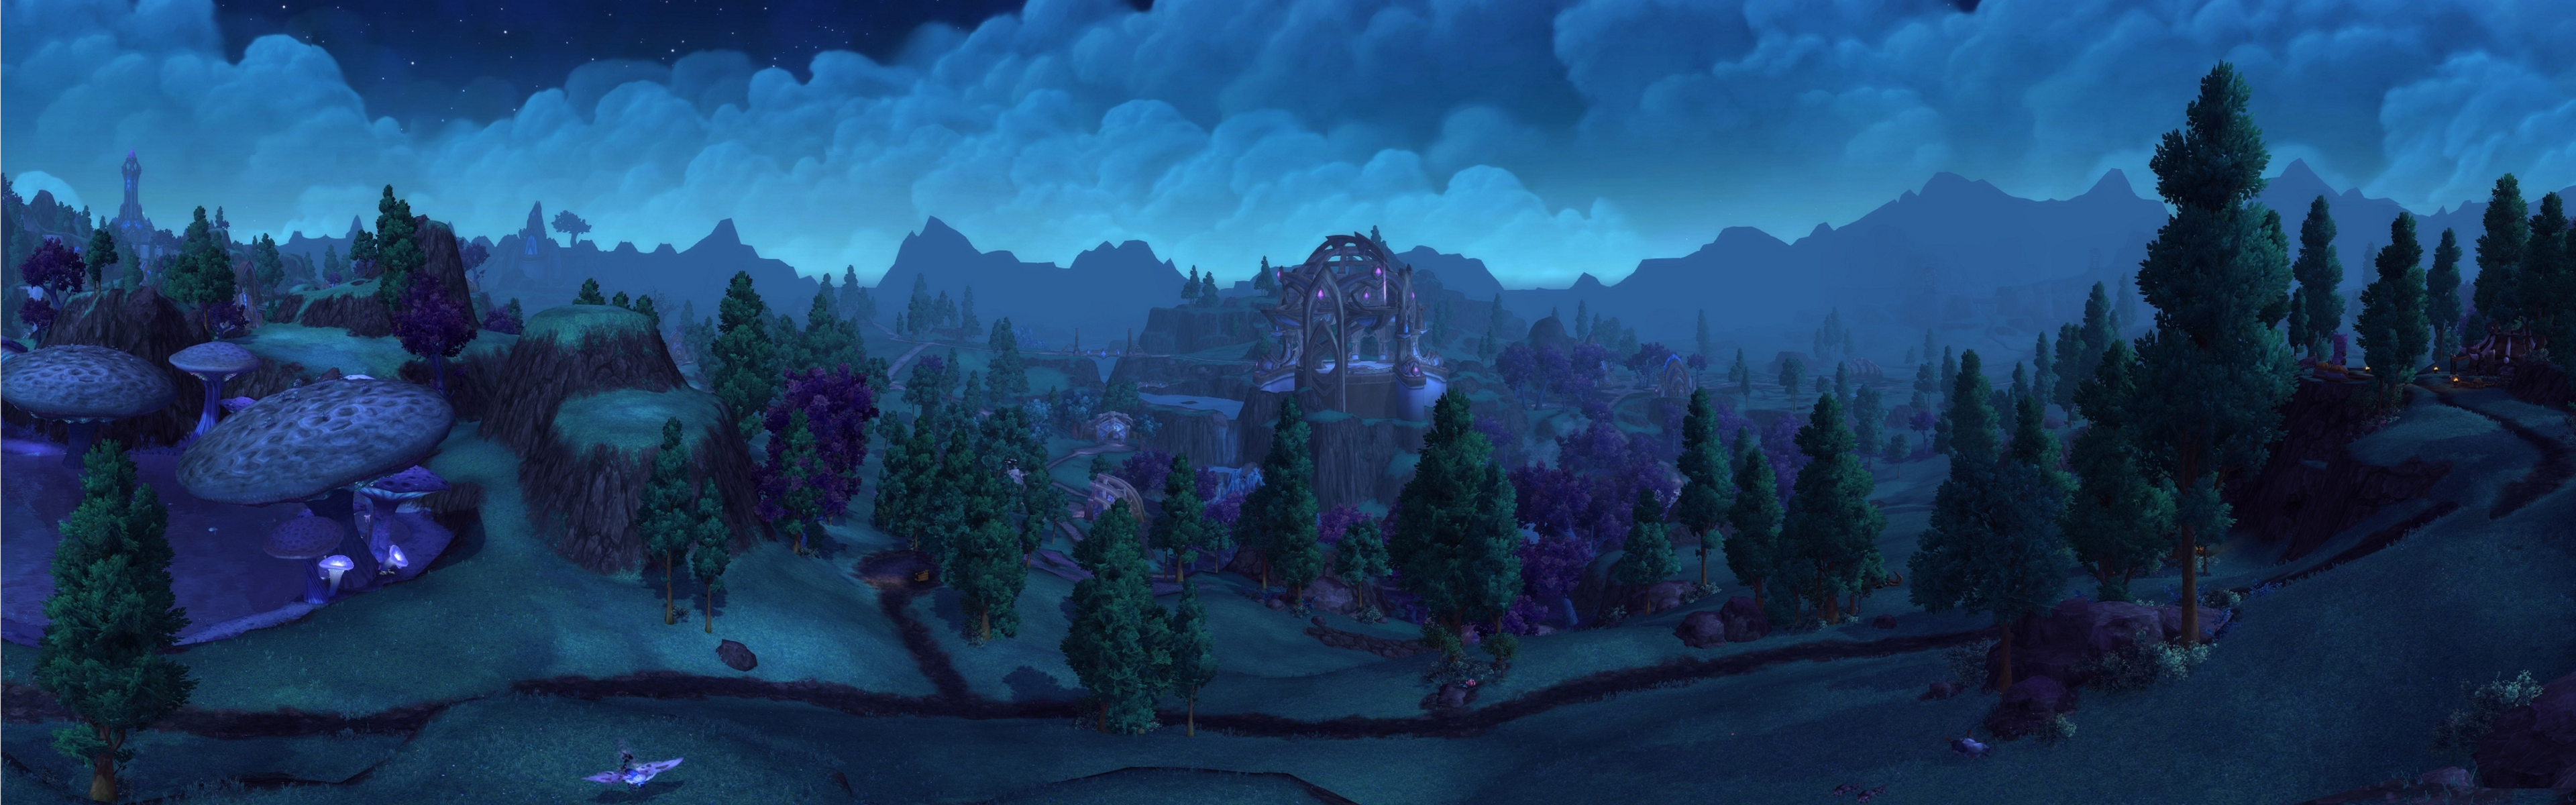 General 3840x1200 World of Warcraft Shadowmoon Valley Warlords of Draenor PC gaming World of Warcraft: Warlords of Draenor